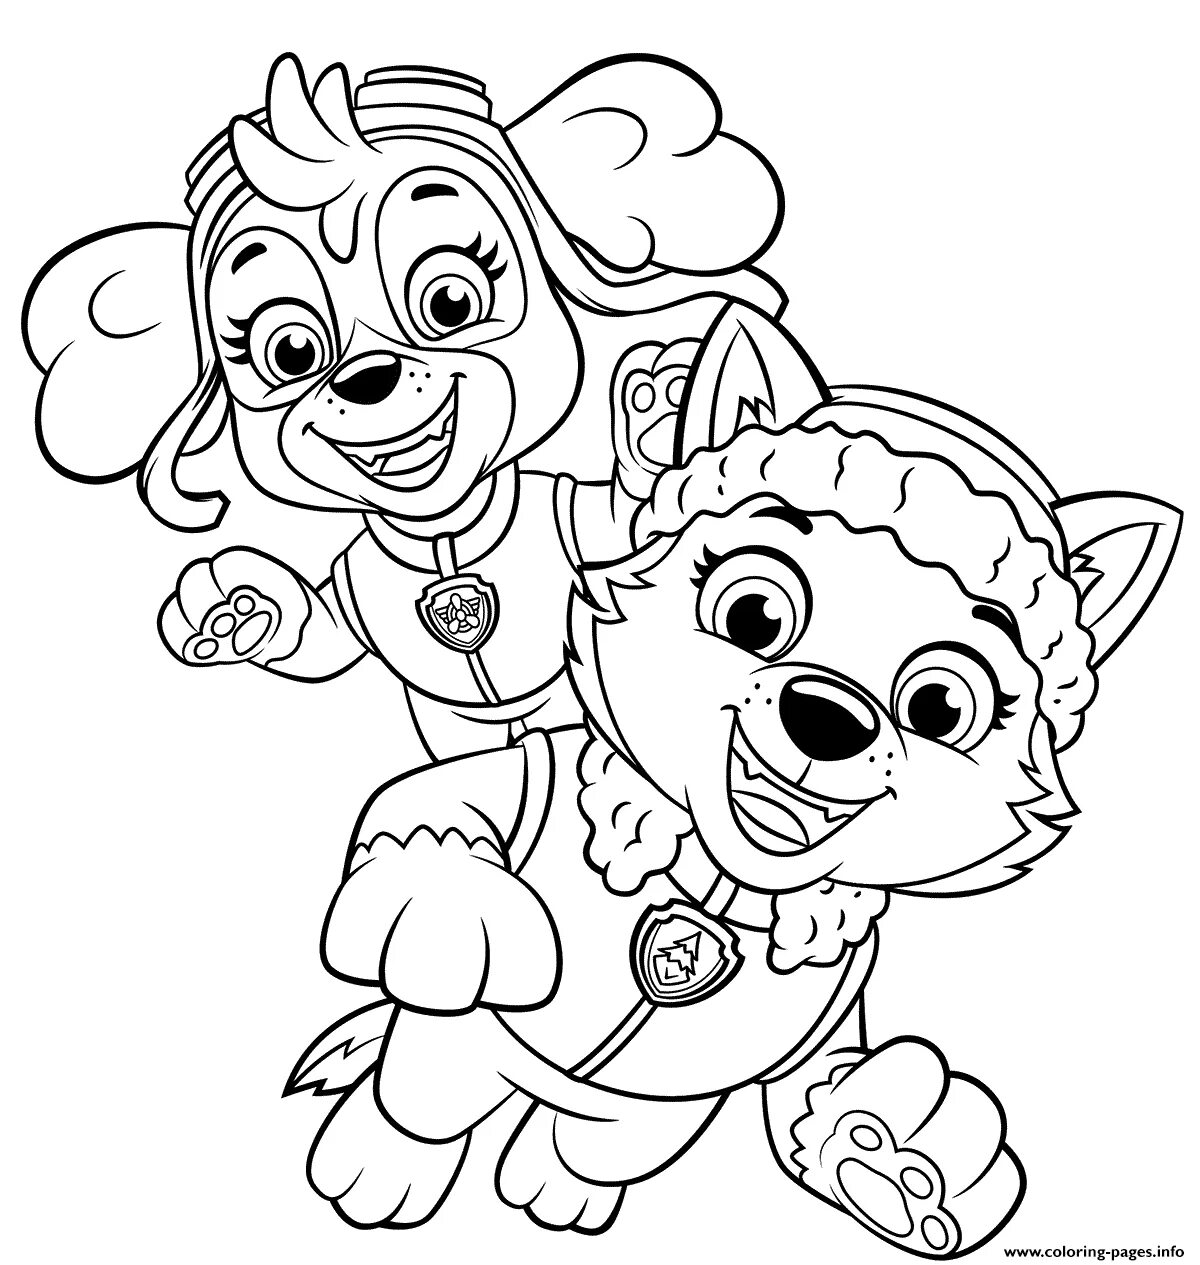 Whimsical Everest puppy coloring